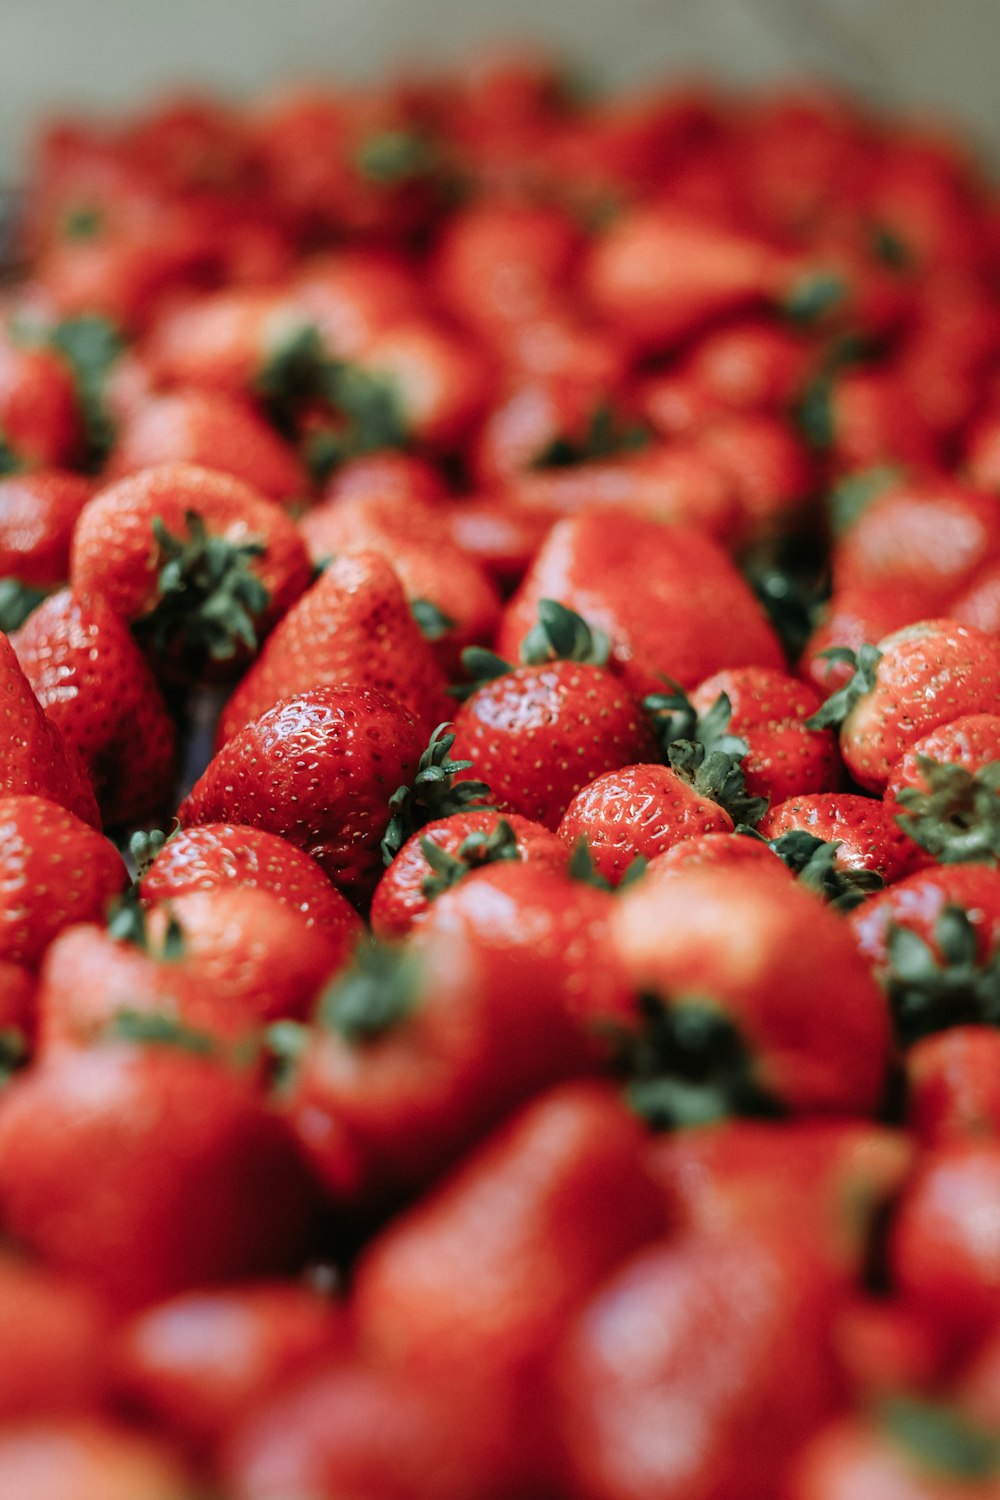 red strawberry fruits close-up photography